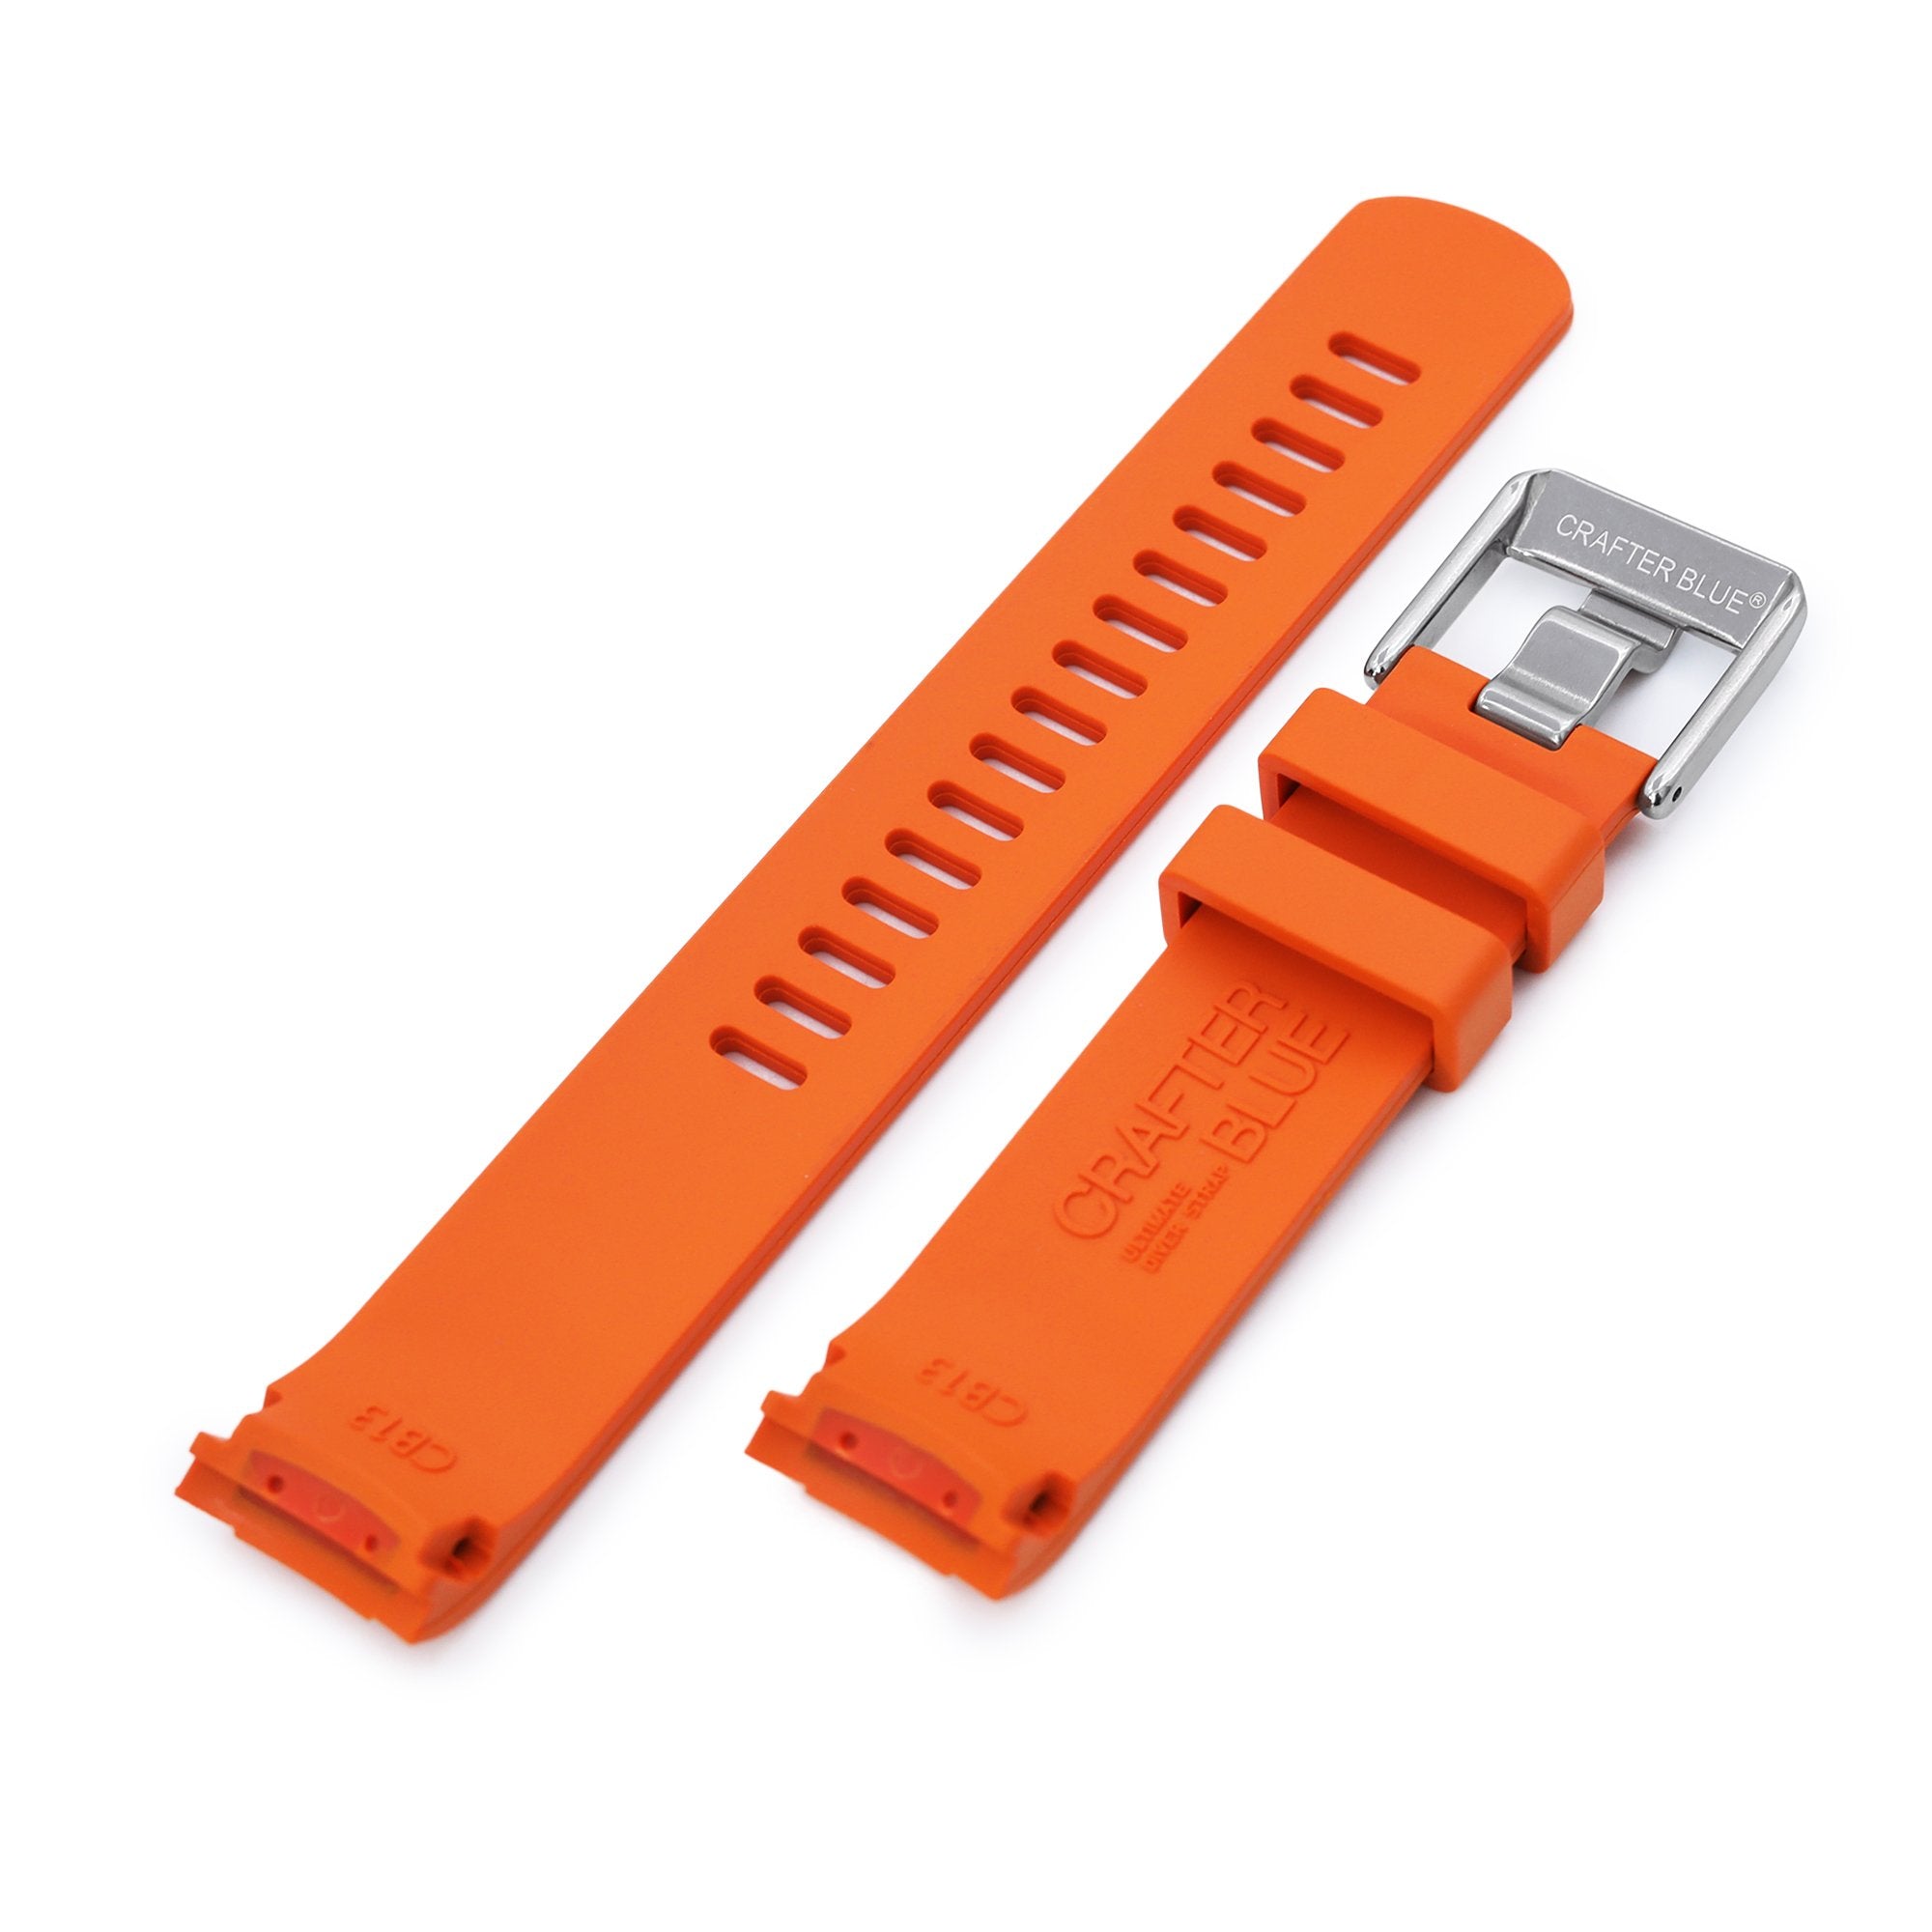 20mm Crafter Blue - Orange Rubber Curved Lug Watch Strap for Seiko Baby MM200 & Mini Turtles SRPC35 Strapcode Watch Bands